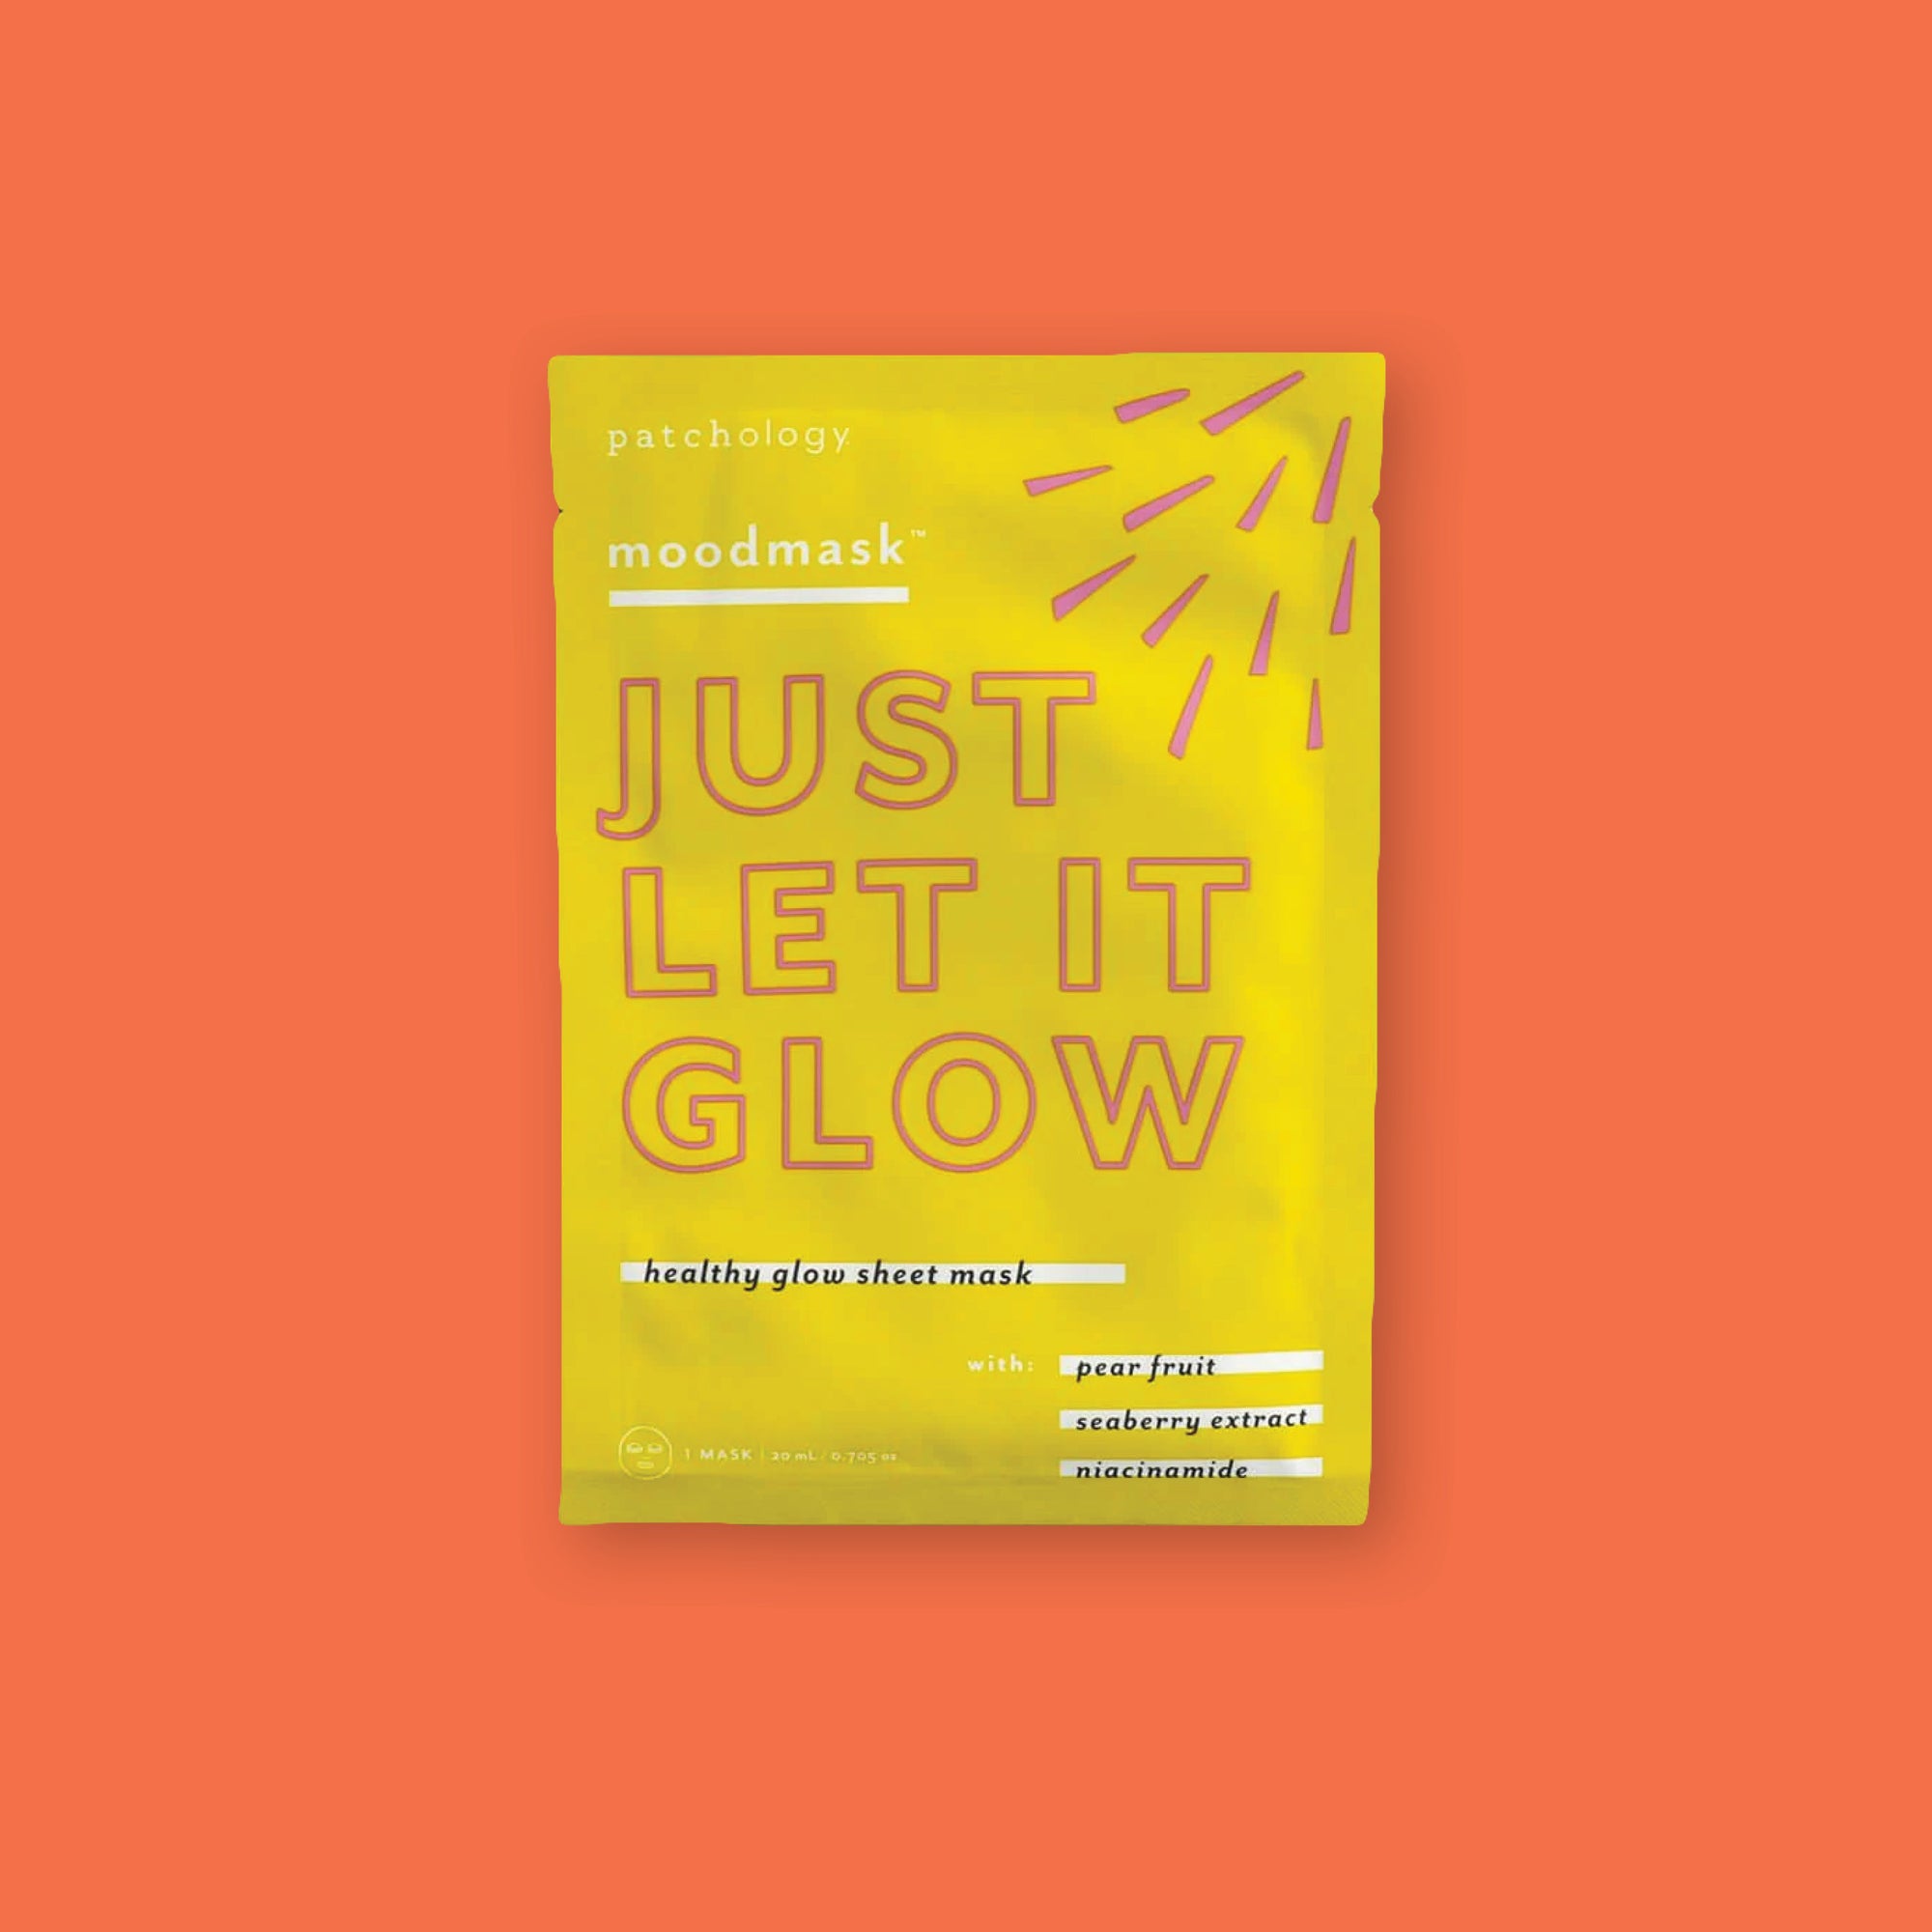 On an orangey-red background sits a package. The yellow package says "JUST LET IT GLOW" in a pink outlined, block font. It says "healthy glow sheet mask with pear fruit seaberry extract niacinamide" in black, serif italics font with white blocks behind the wording. 1 mask